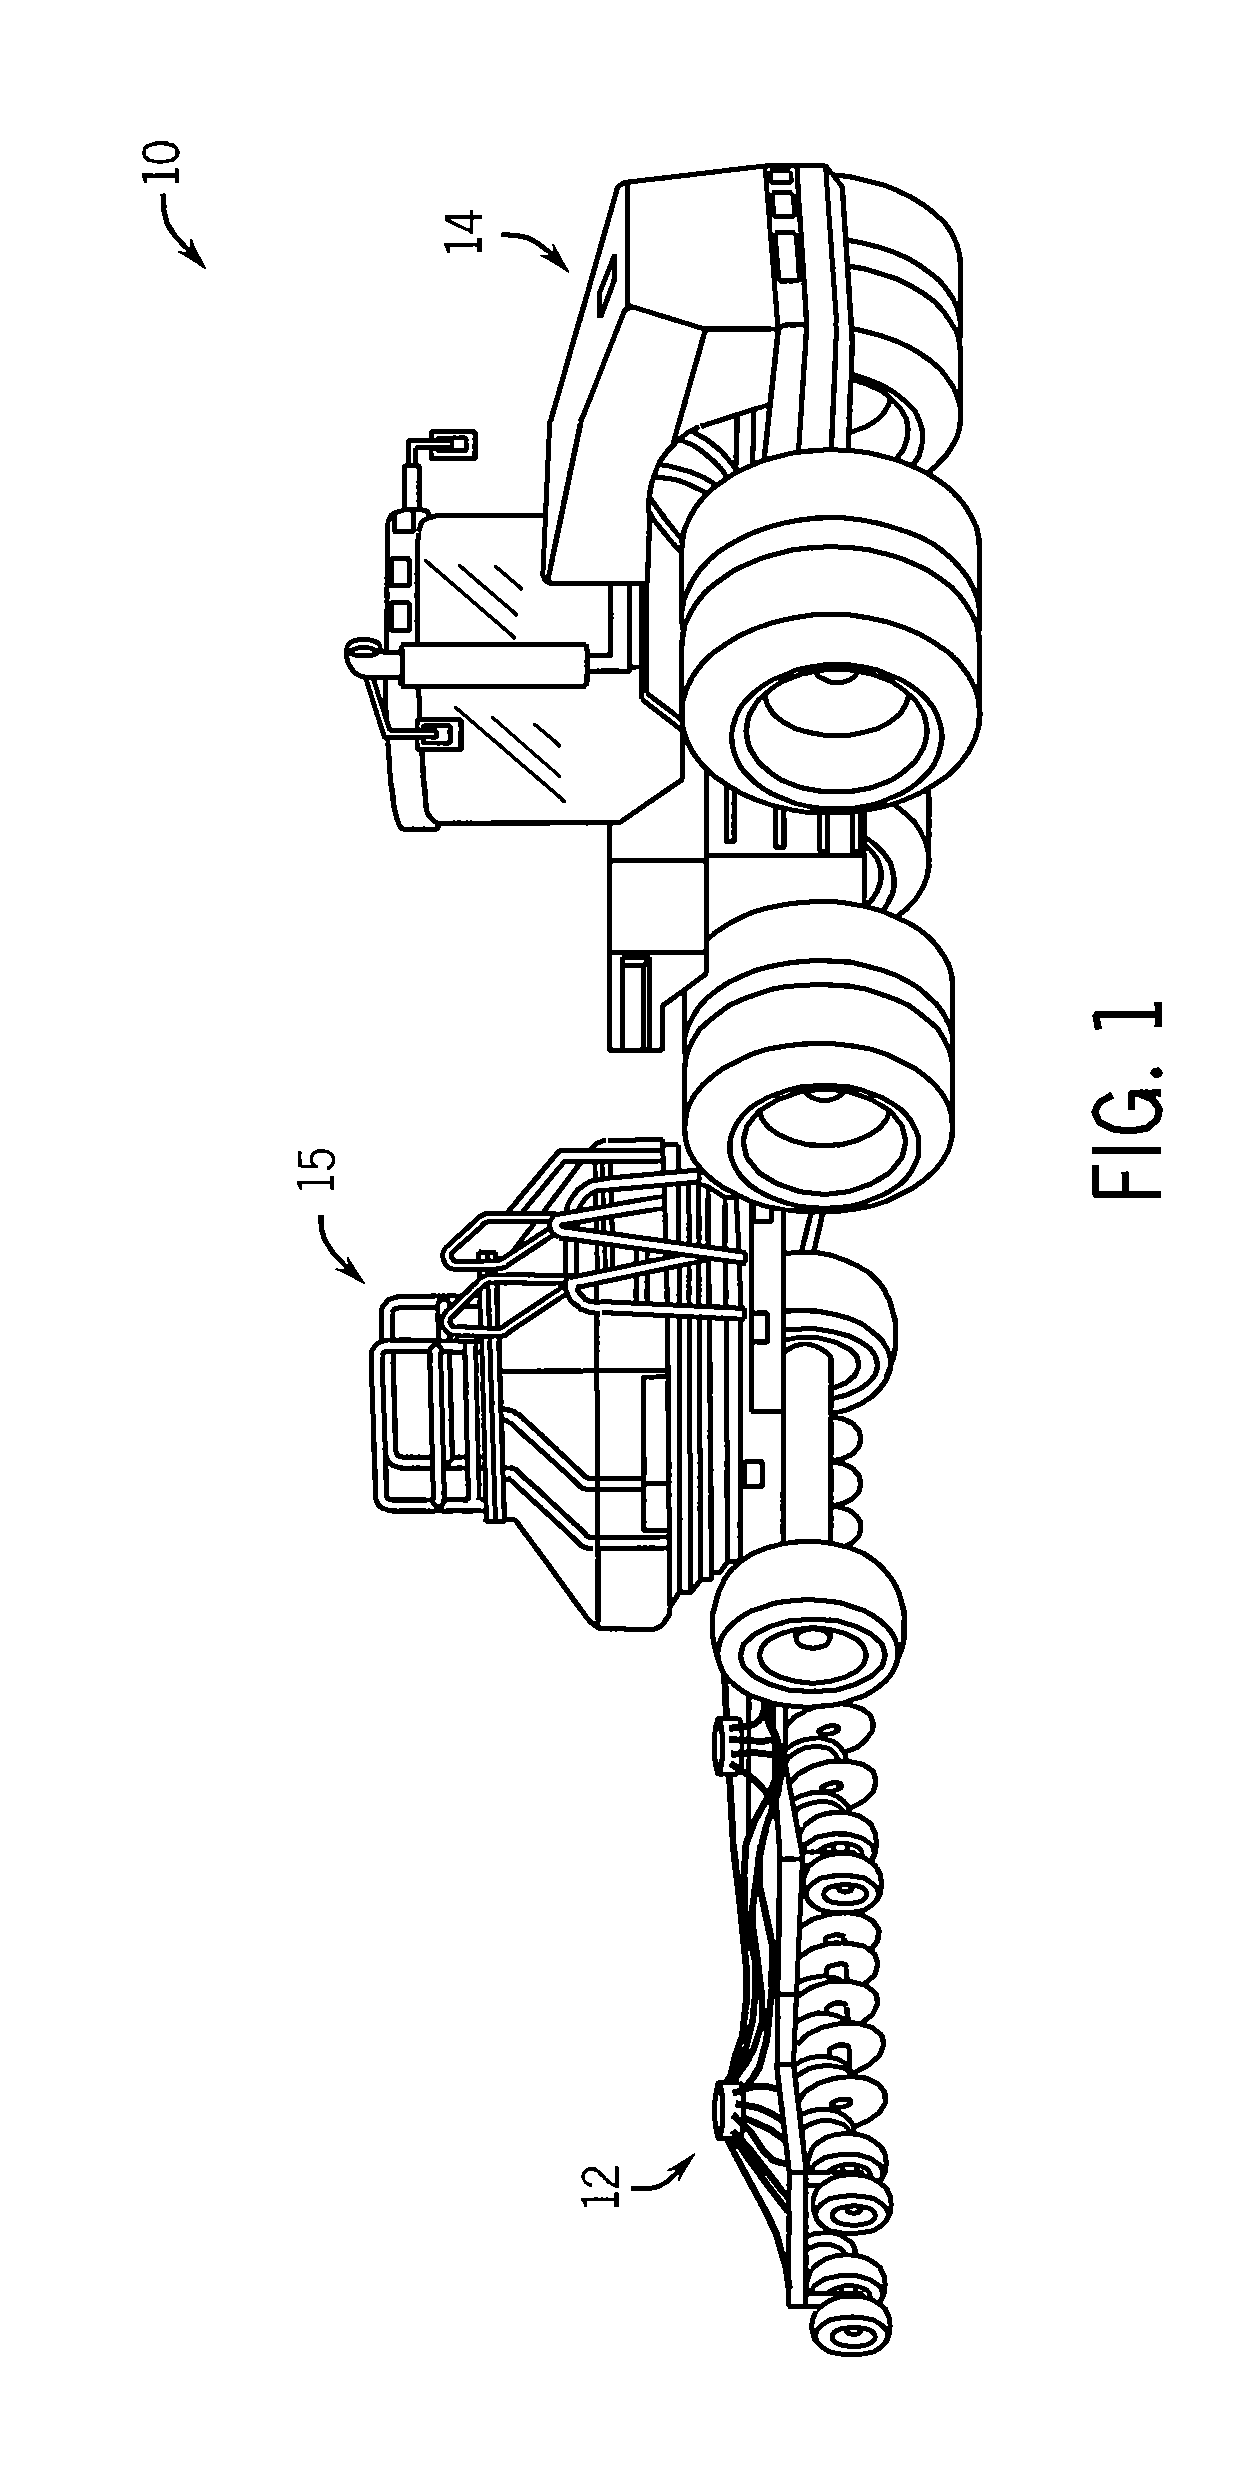 Electronically controlled hydraulic system for an agricultural implement